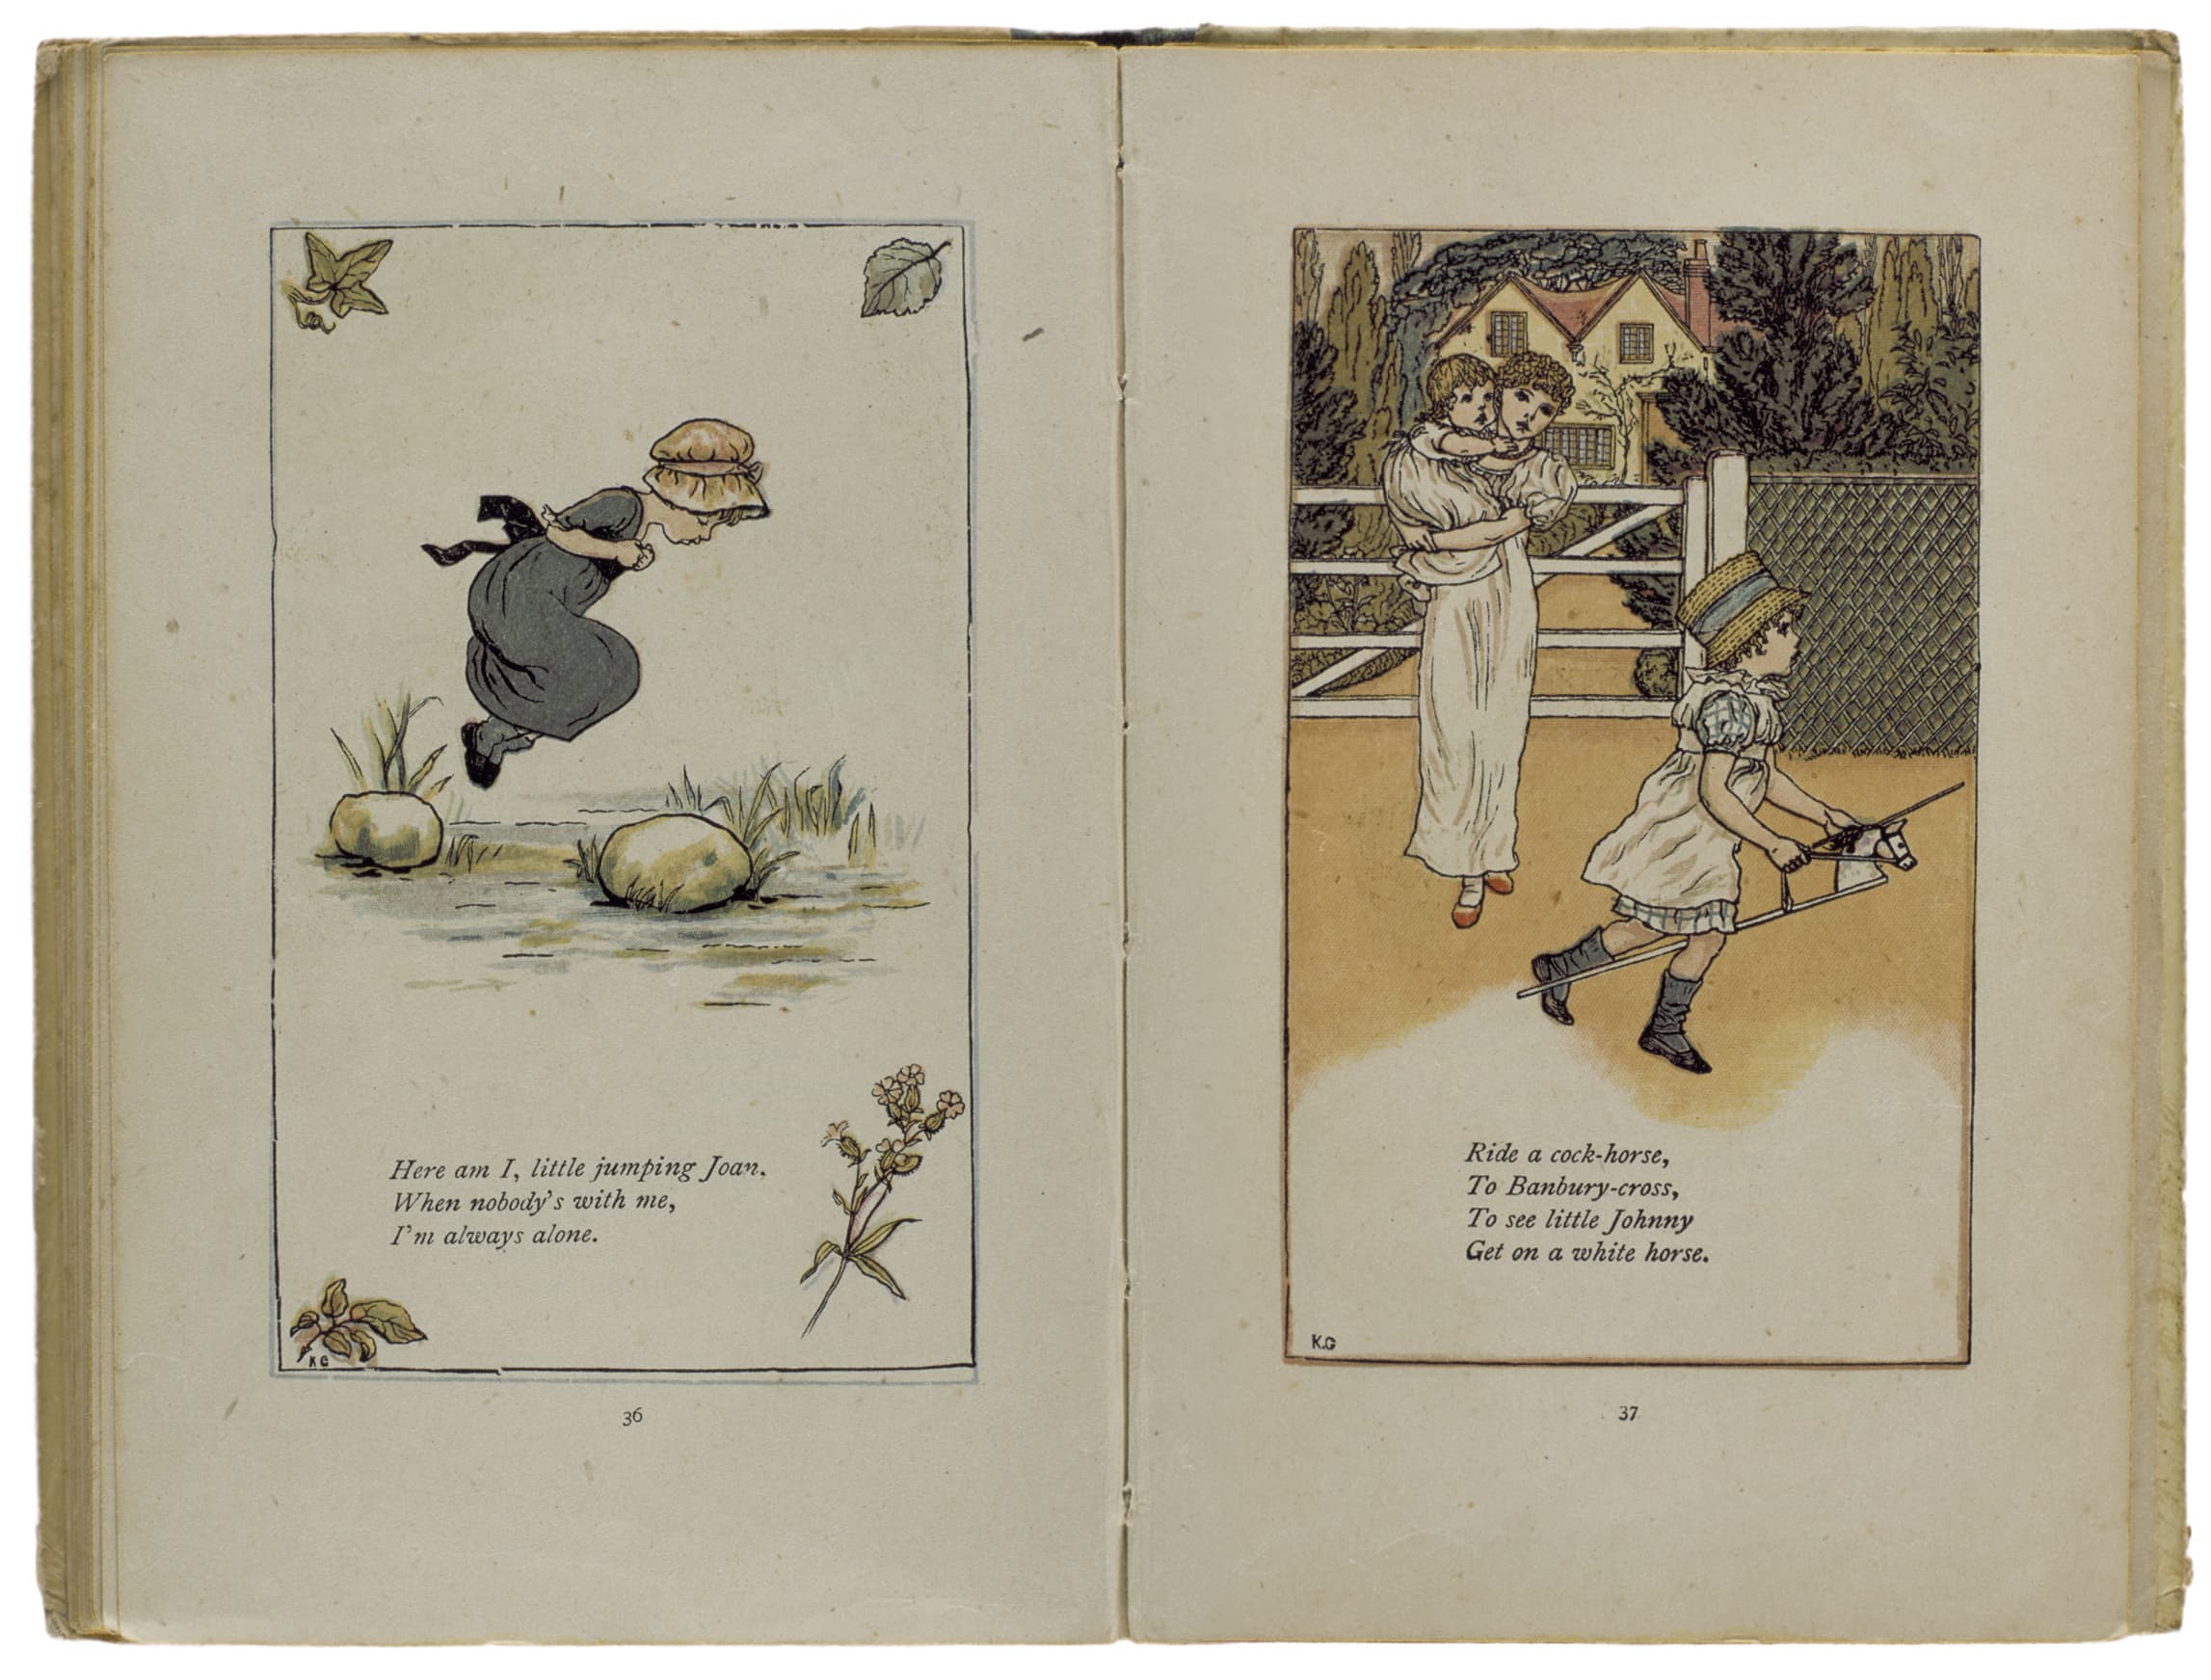 page 36-37 of Mother Goose